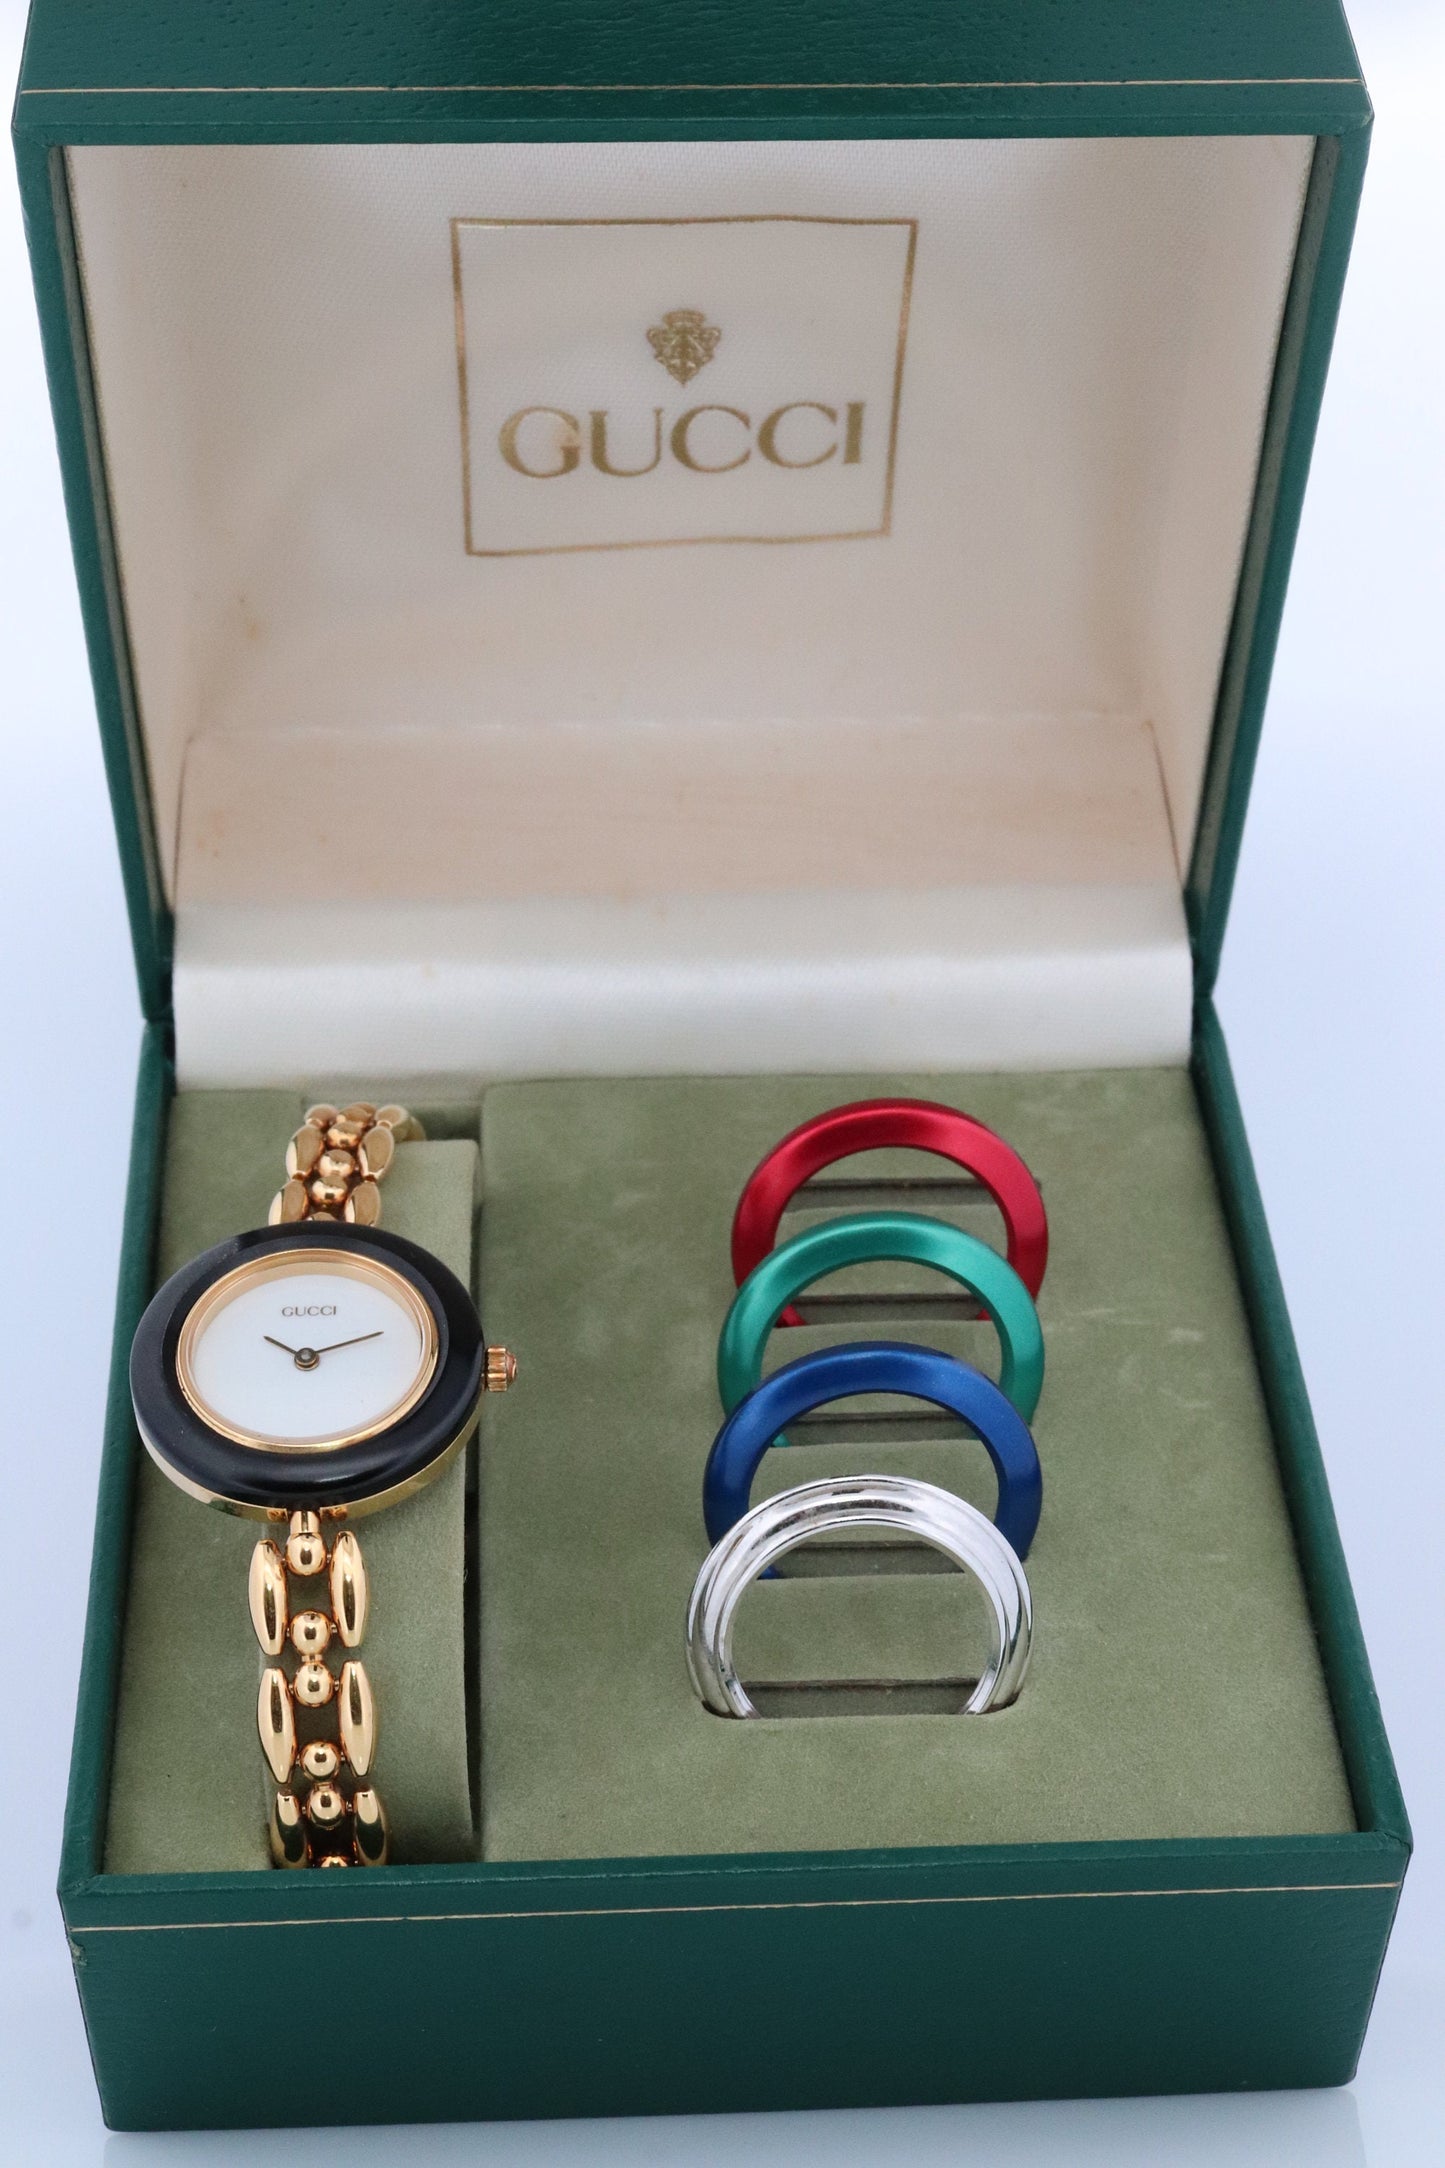 Genuine GUCCI 11/12 Watch. Vintage Ladies Gucci Change Bezel Watch. With Box and Bezels.